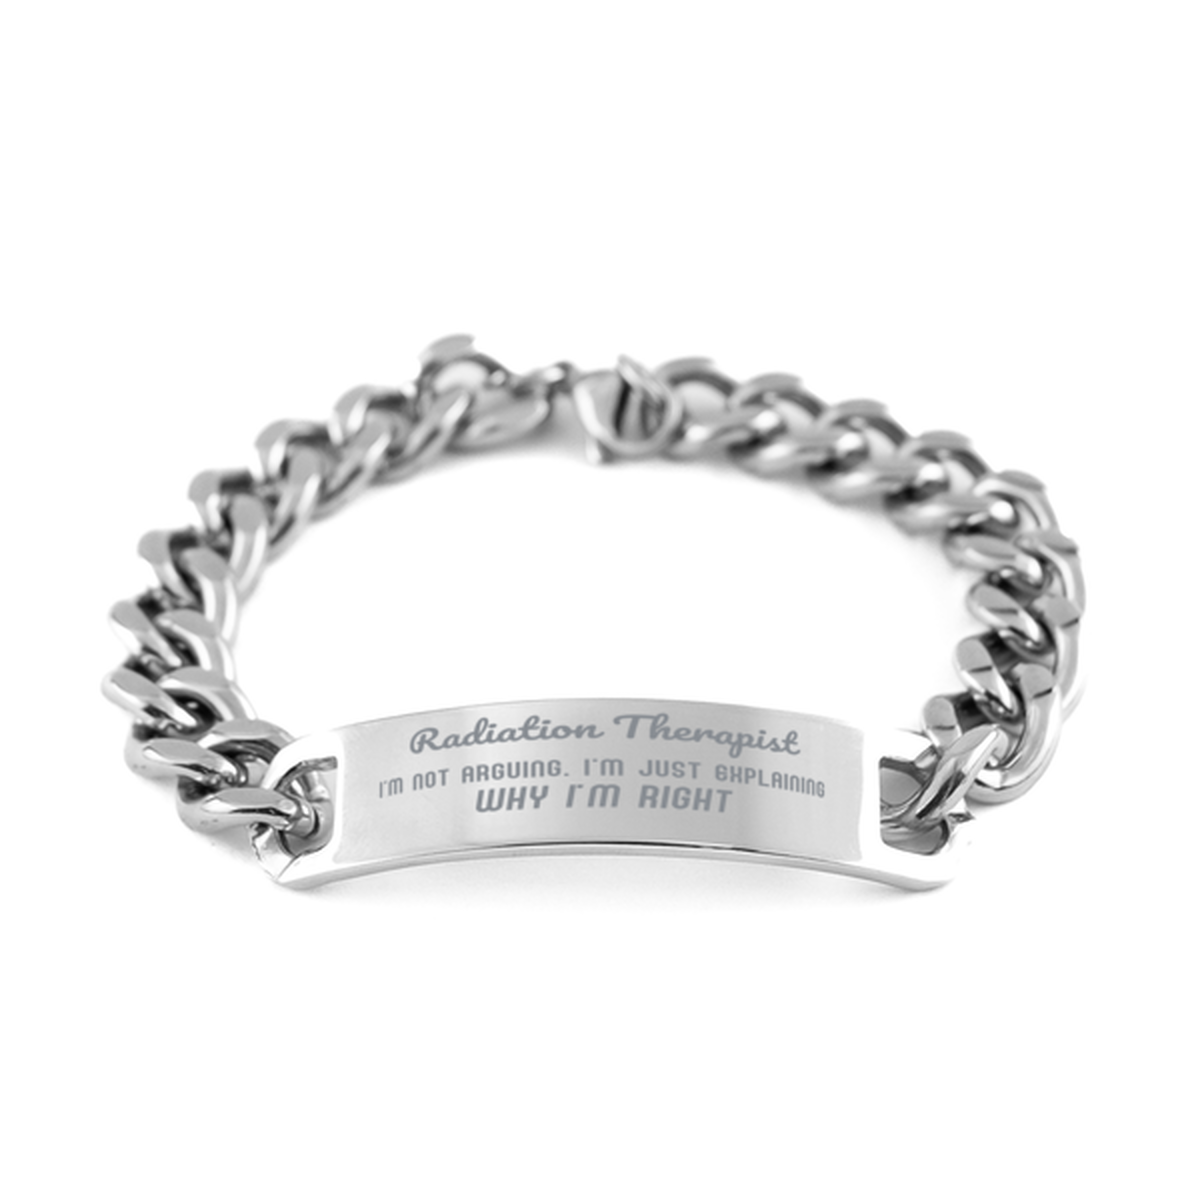 Radiation Therapist I'm not Arguing. I'm Just Explaining Why I'm RIGHT Cuban Chain Stainless Steel Bracelet, Graduation Birthday Christmas Radiation Therapist Gifts For Radiation Therapist Funny Saying Quote Present for Men Women Coworker